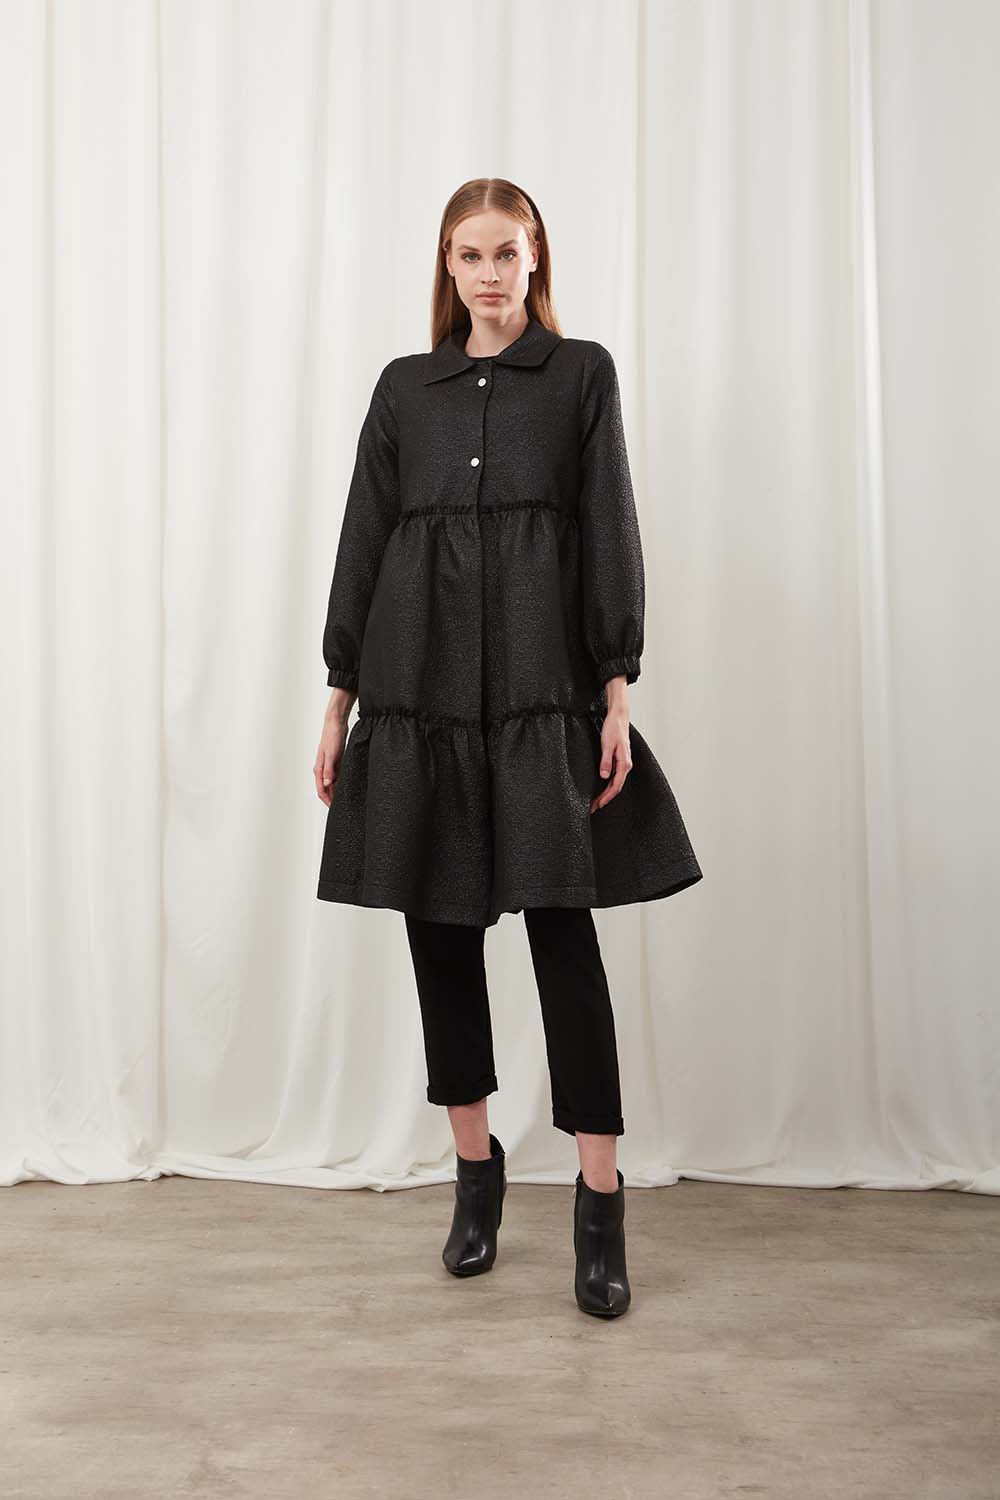 Black Jacquard Cape with Buttoned Collar